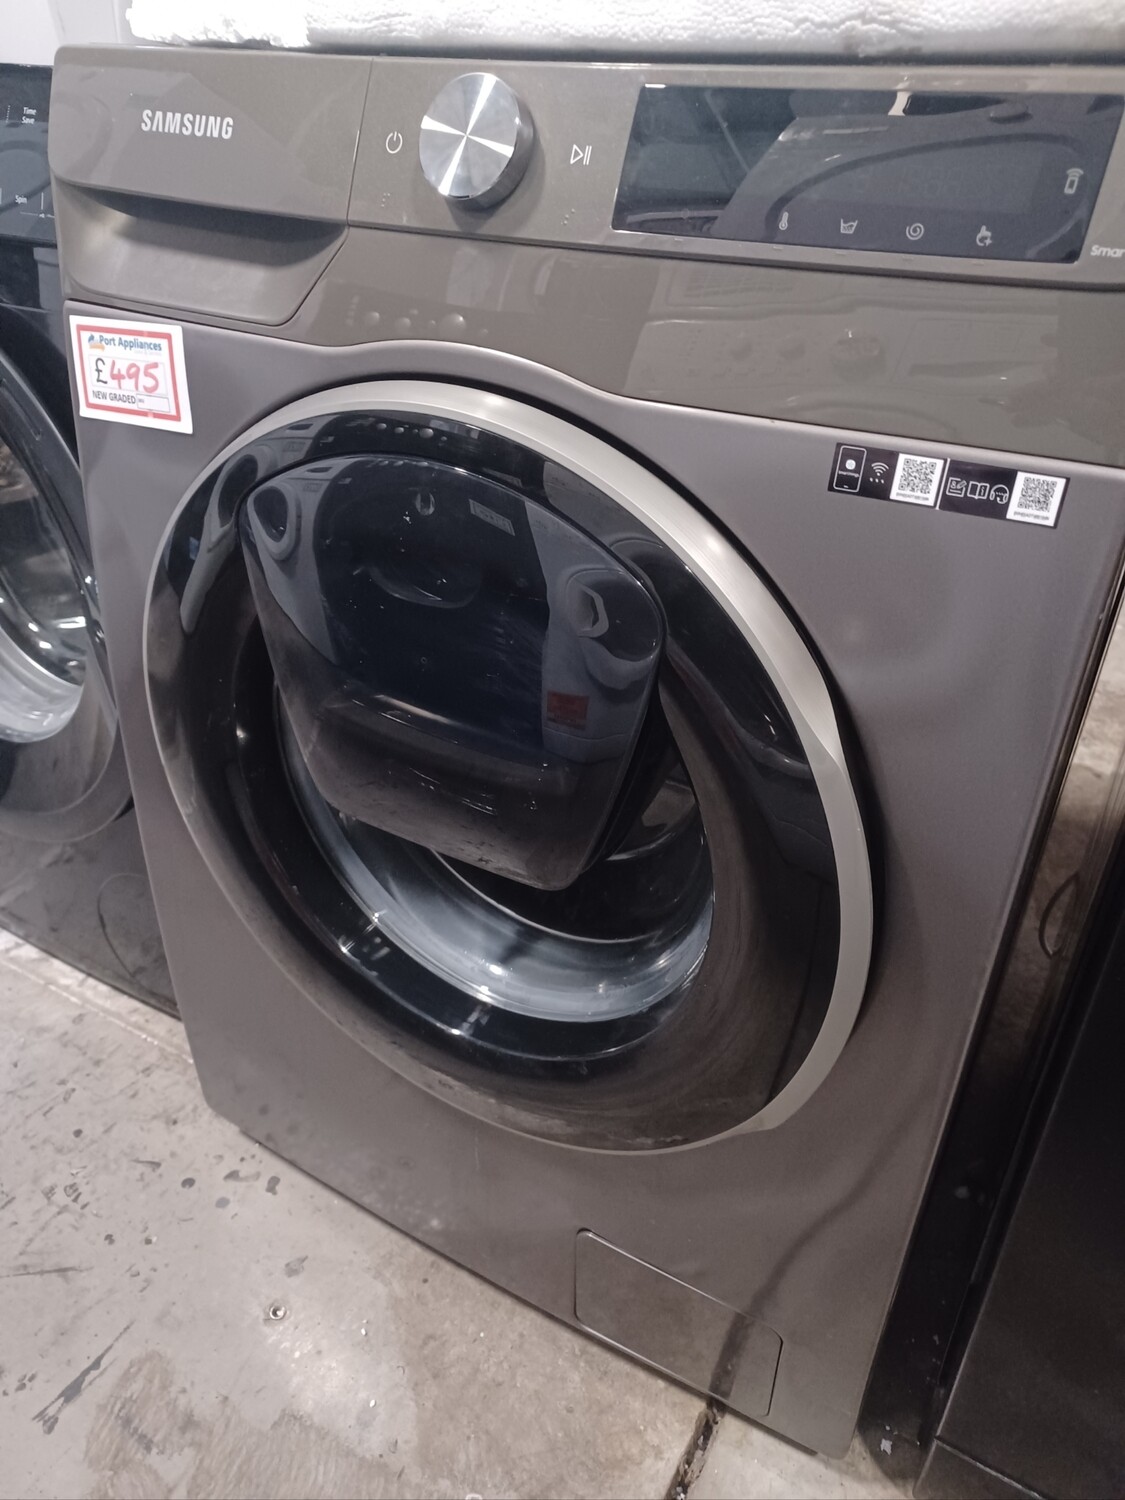 Samsung WW10T684DLN.S1 10kg Load, 1400 Spin Washing Machine - Graphite Grey- New Graded - 12 Month Guarantee